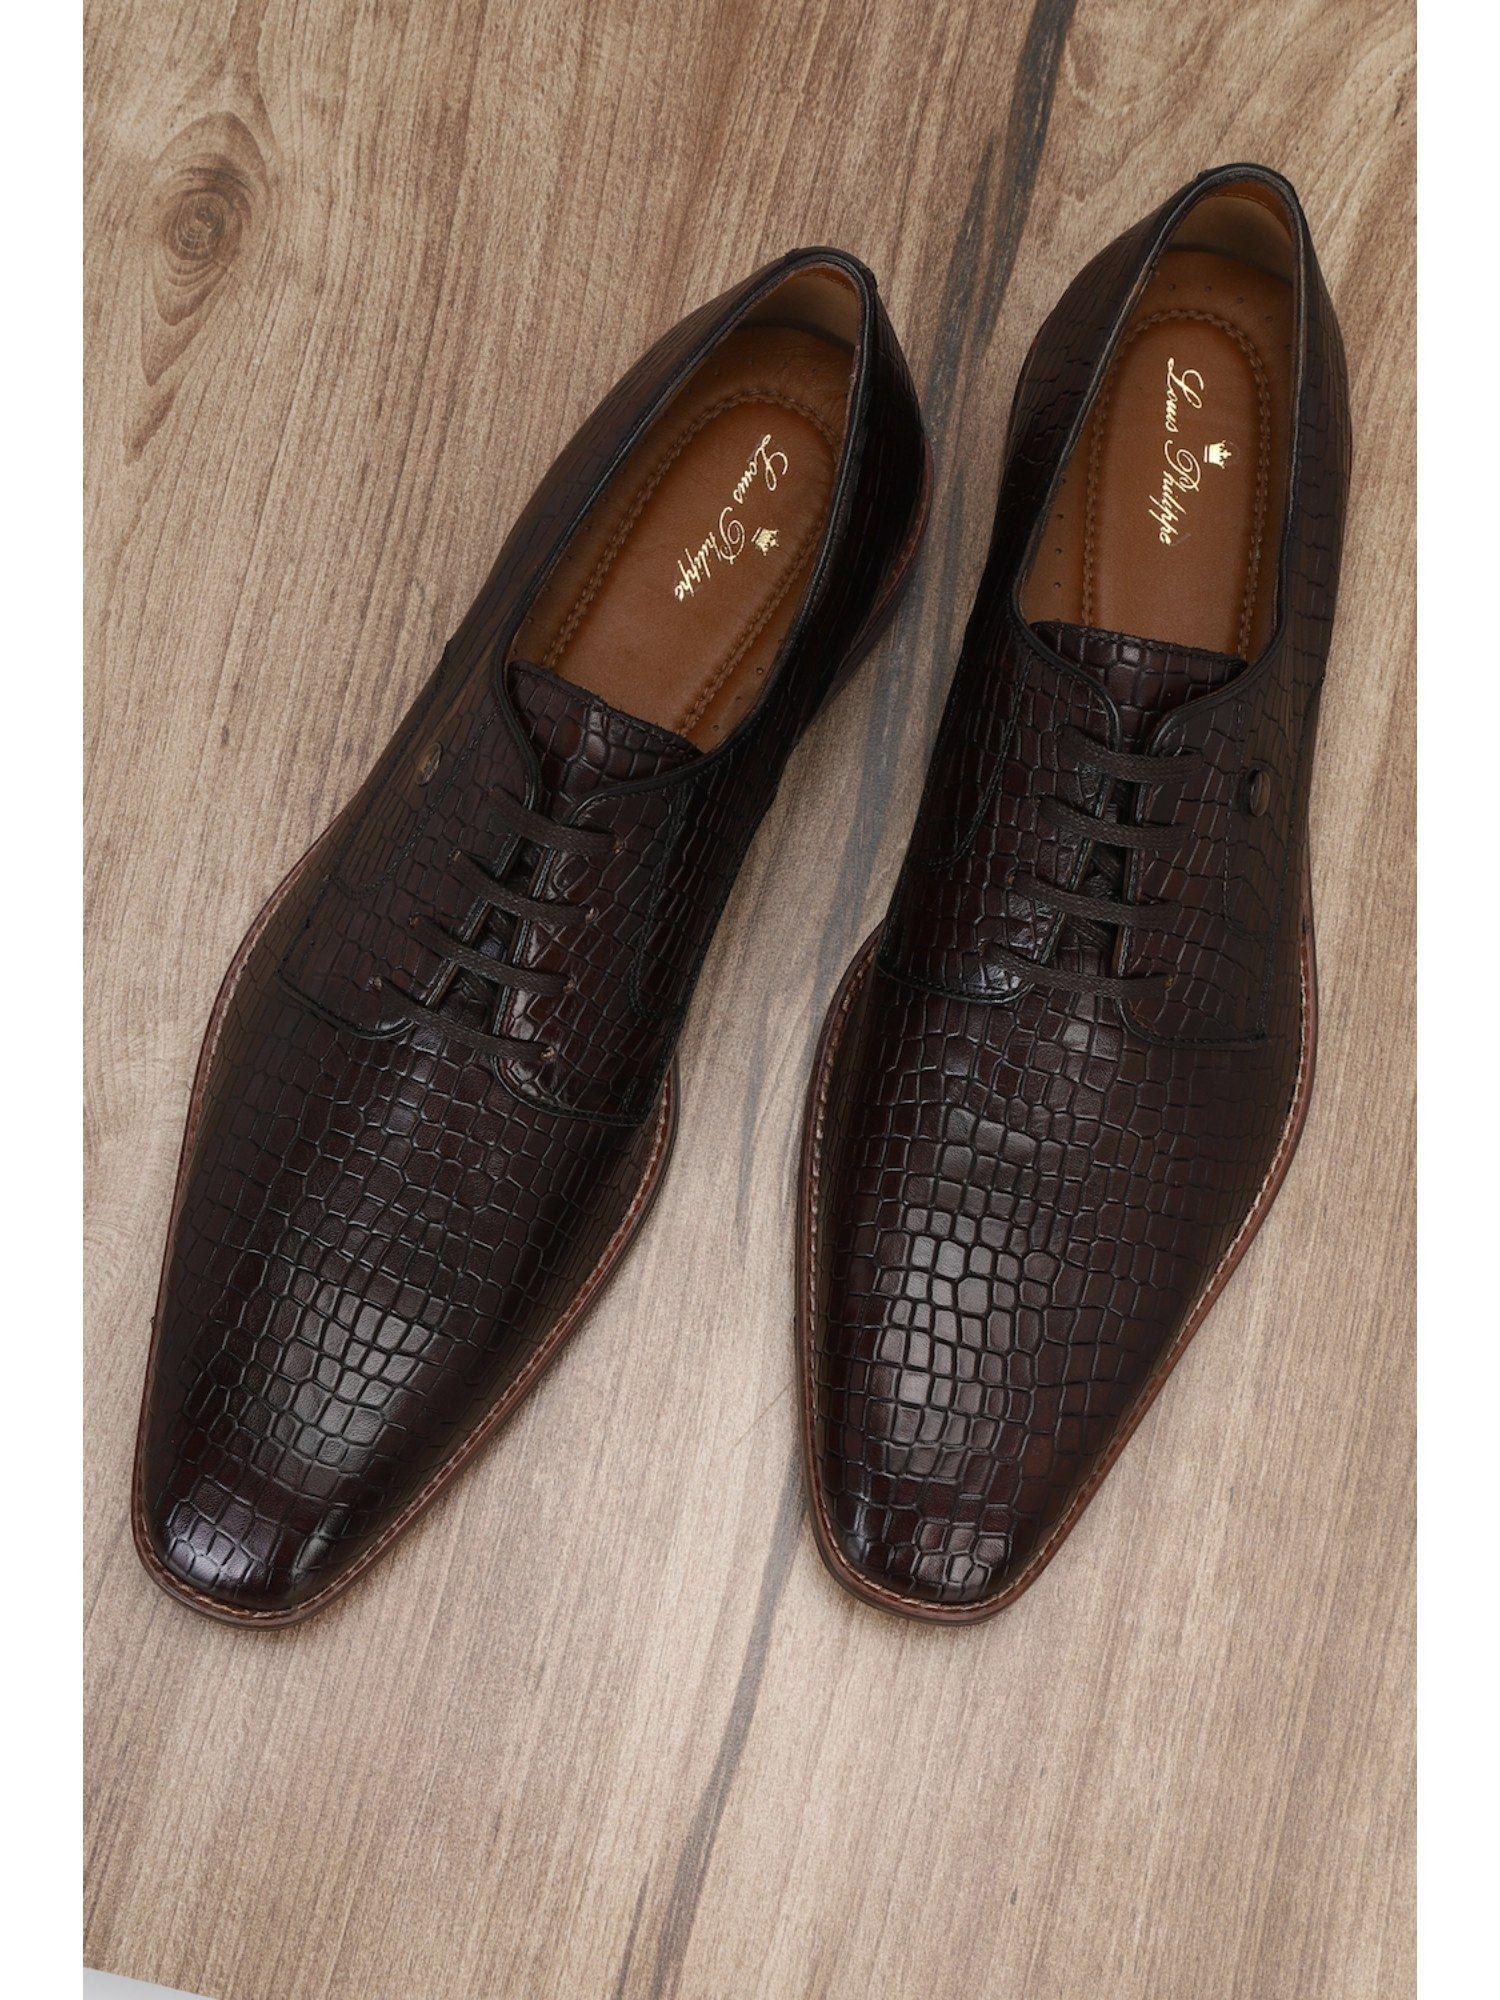 dark brown lace up shoes